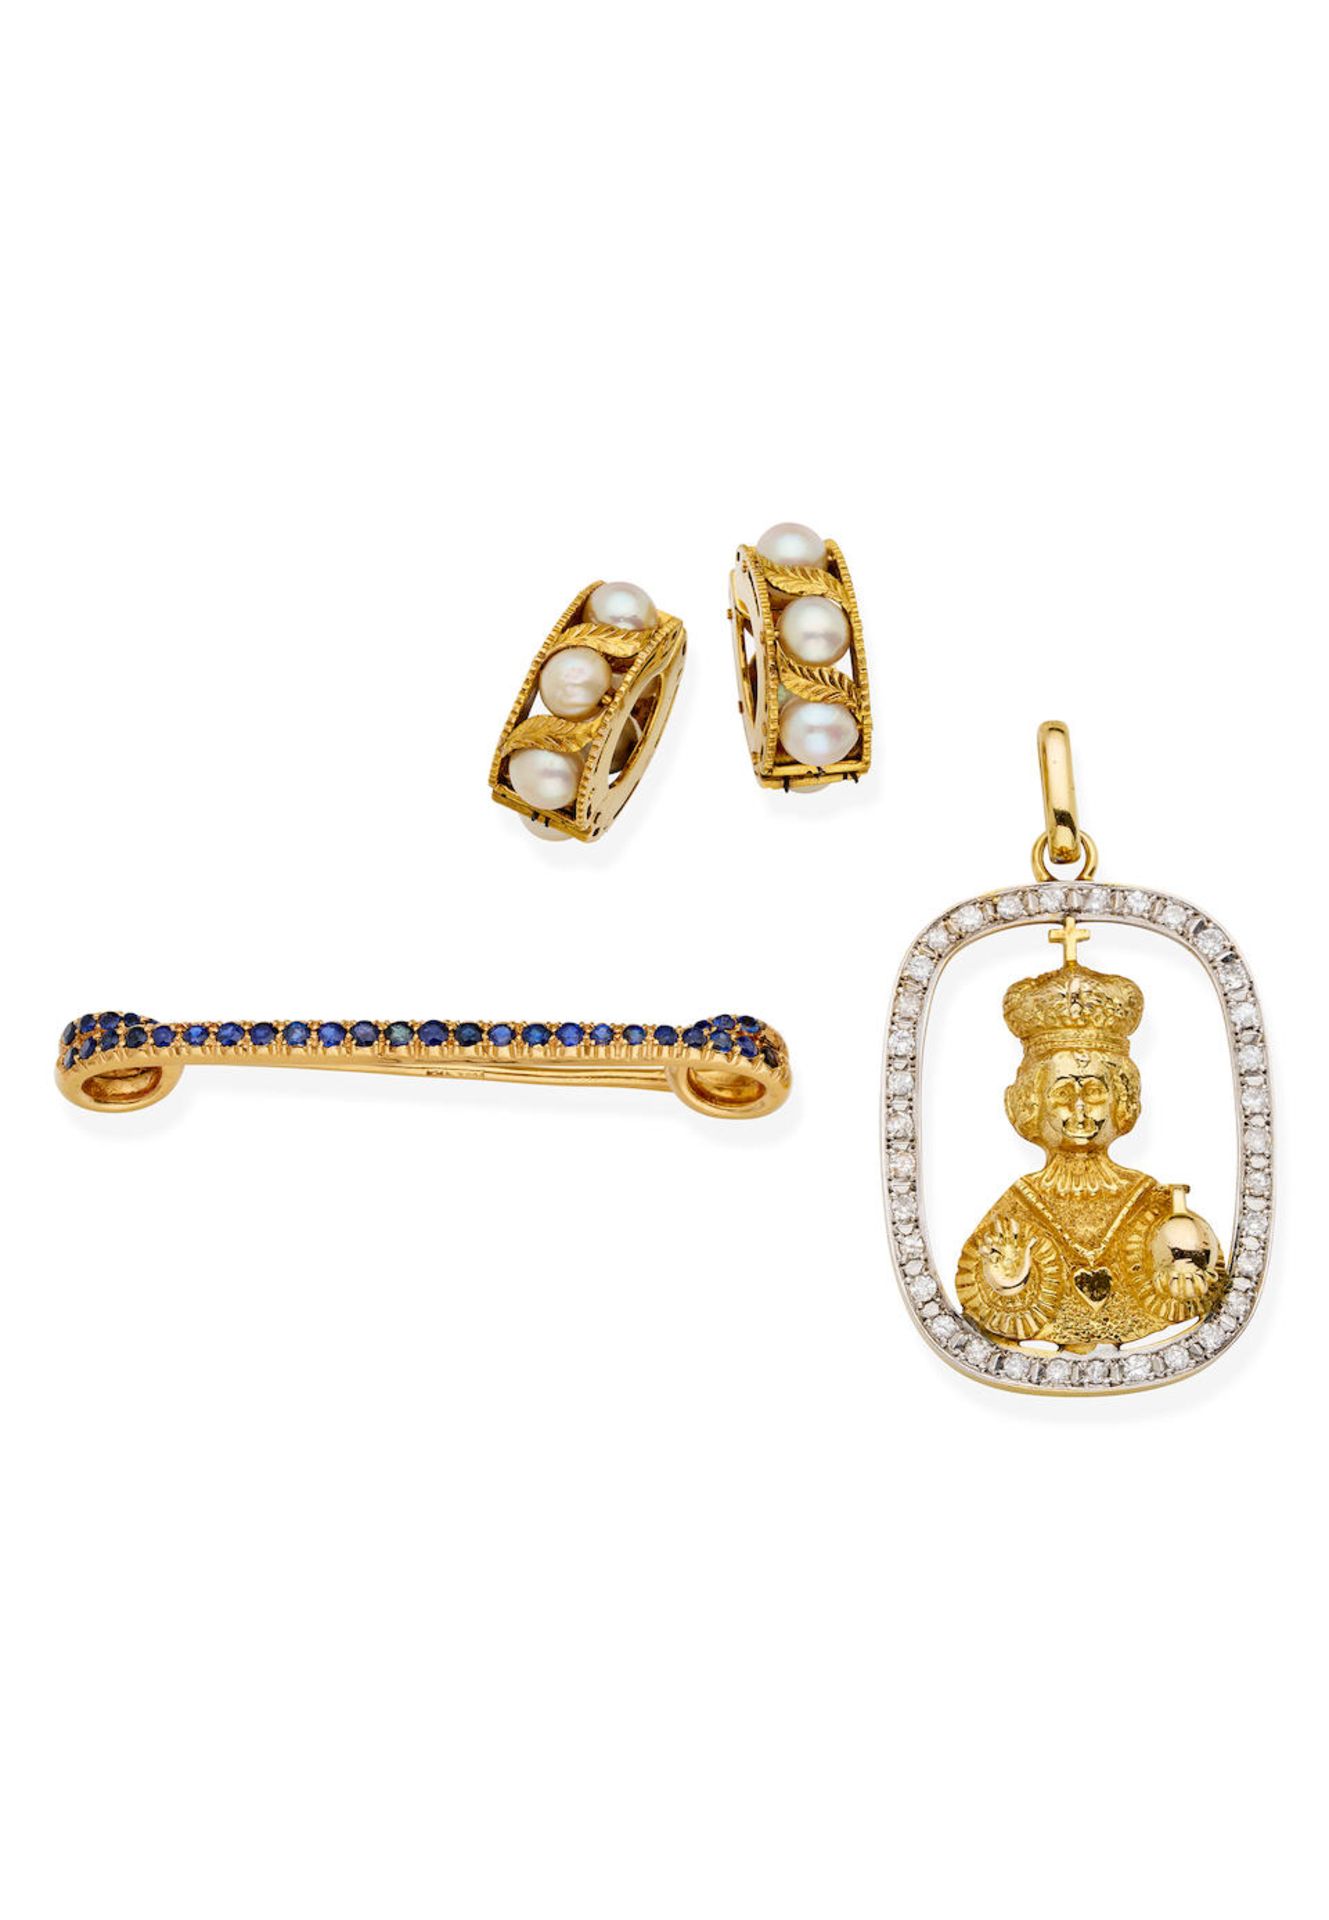 GROUP OF GOLD AND GEM SET JEWELLERY